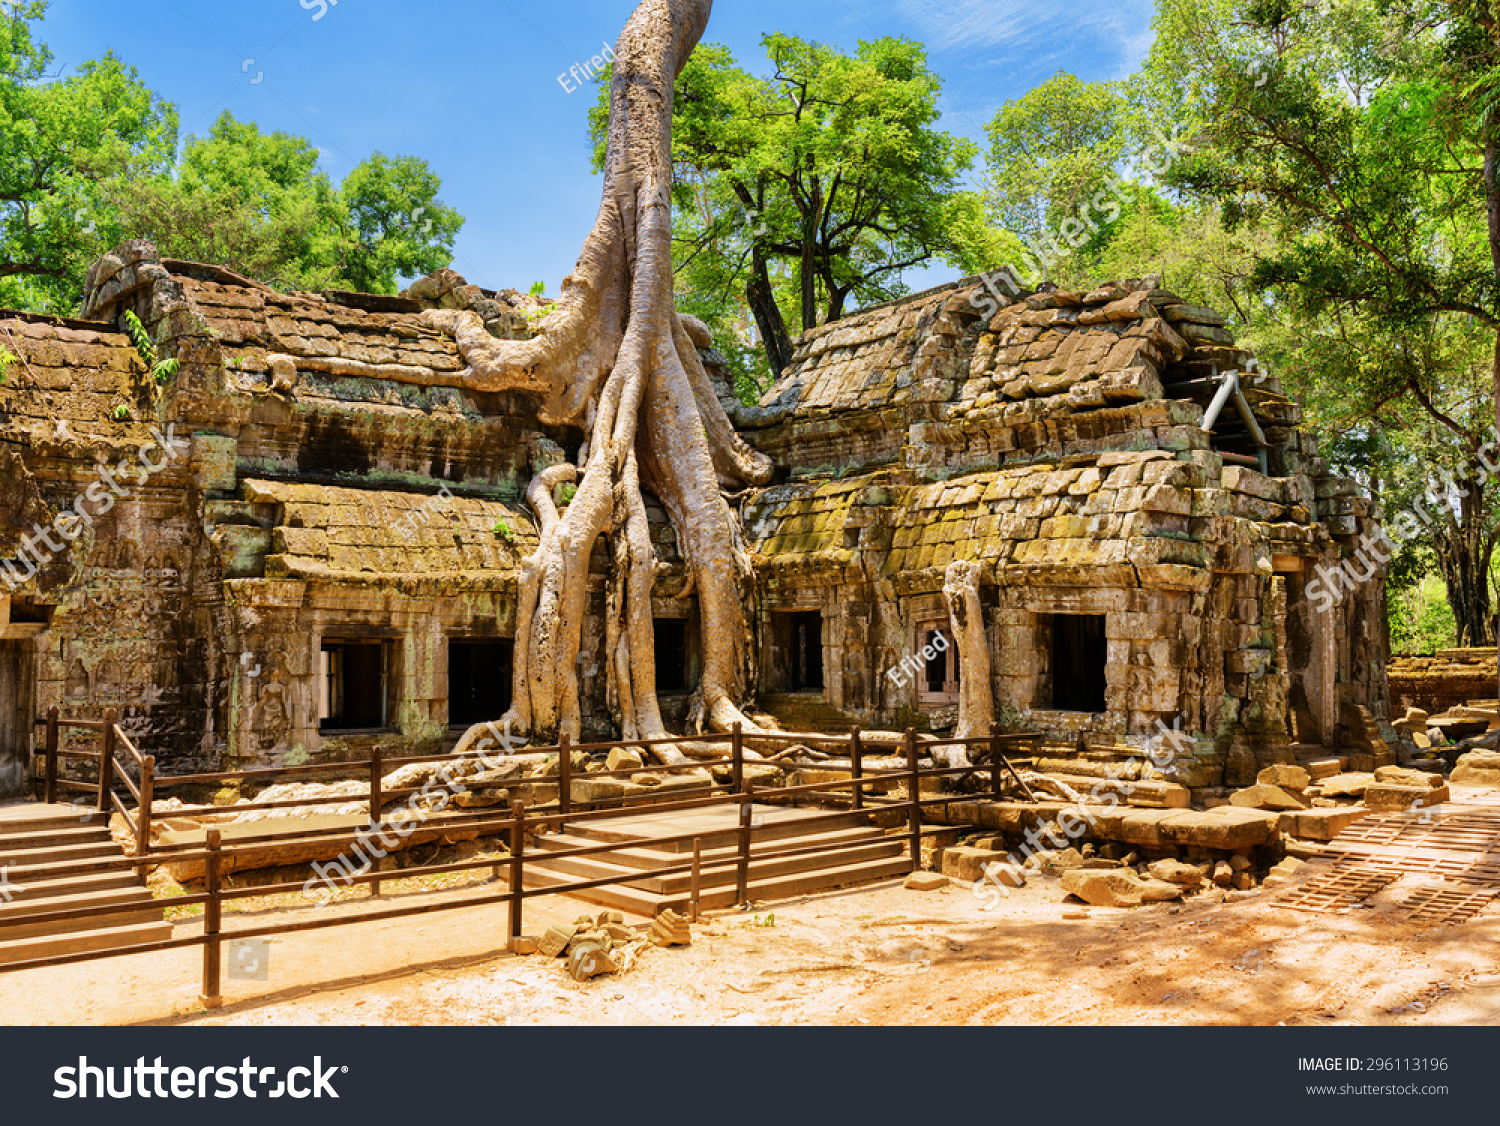 Ancient gallery of amazing Ta Prohm temple overgrown with trees. Mysterious ruins of Ta Prohm nestled among rainforest in Angkor, Siem Reap, Cambodia. Angkor is a popular tourist attraction. #296113196